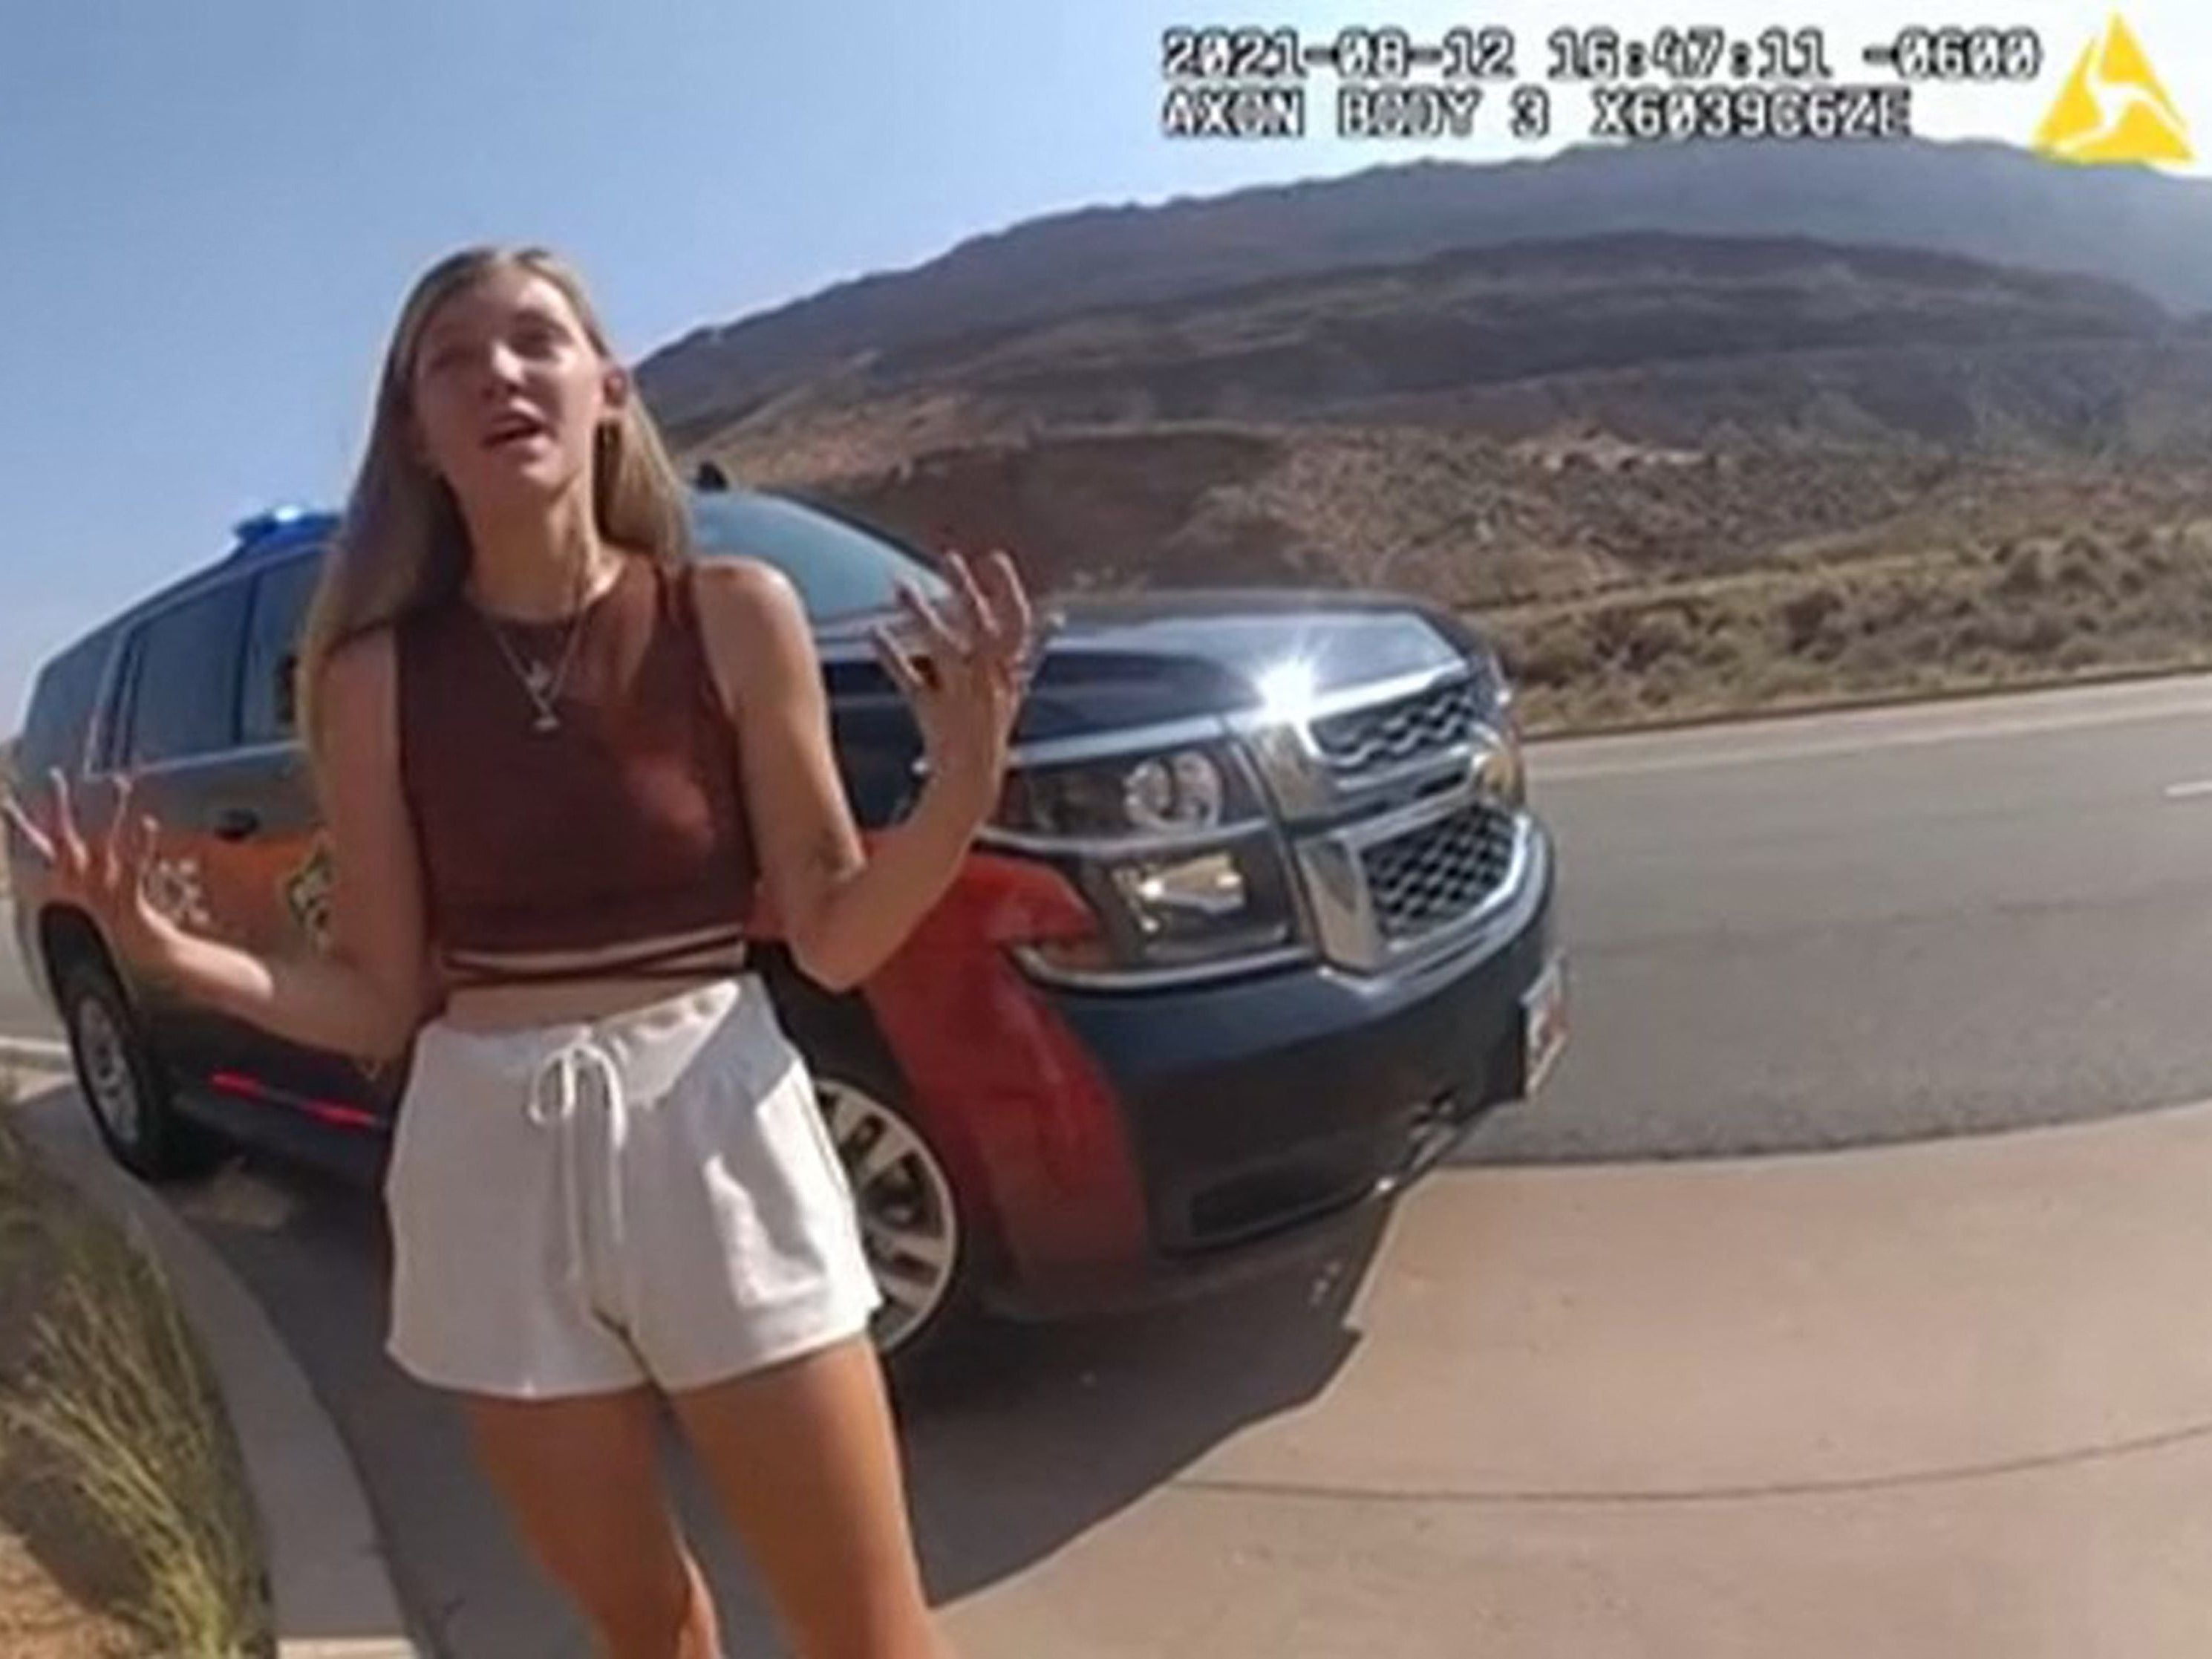 Gabby Petito speaks with police responding to an altercation between her and her boyfriend in Utah